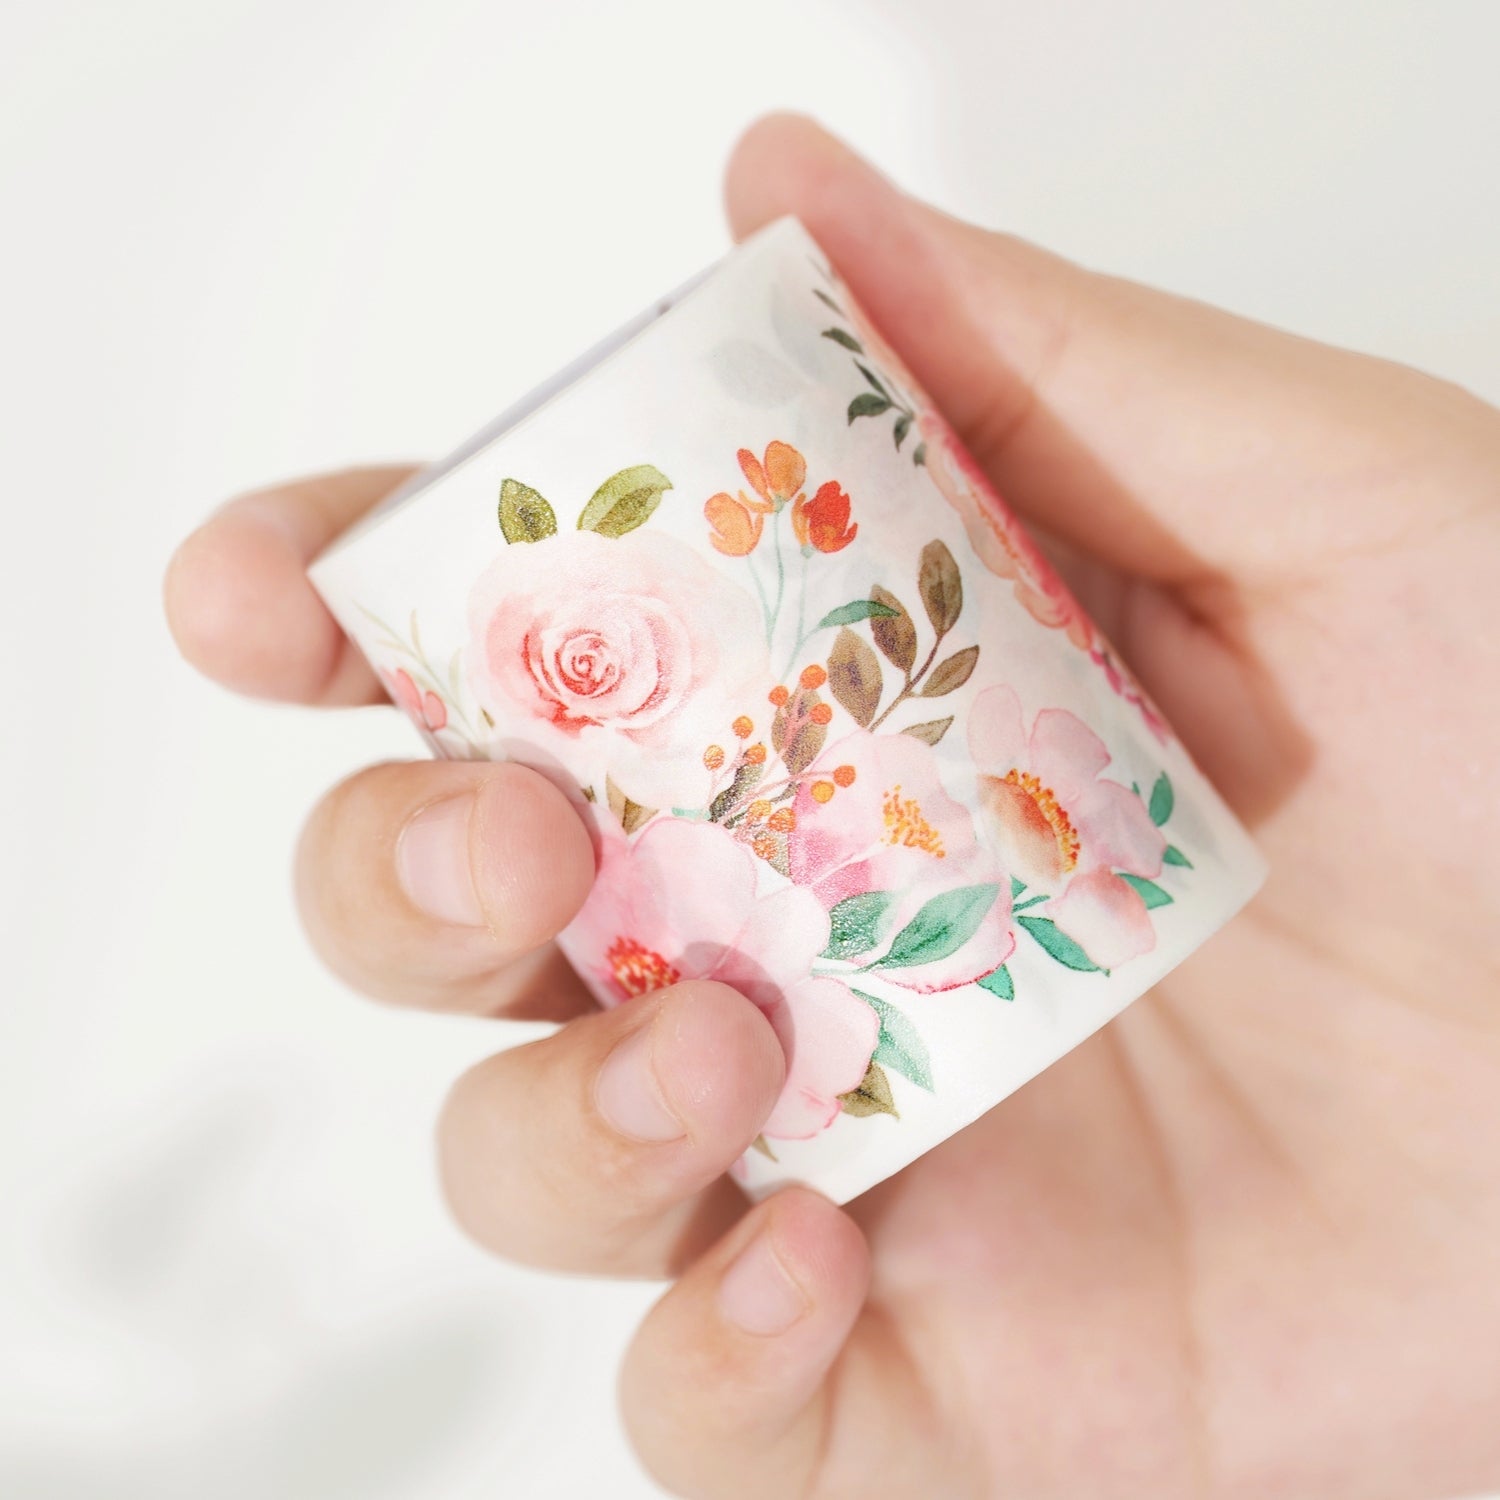 1box Flower Theme Pet Tape, Transparent, With Various Floral Prints, Lovely  Decorative Washi Tape For Journaling, Scrapbooking, Water Bottles